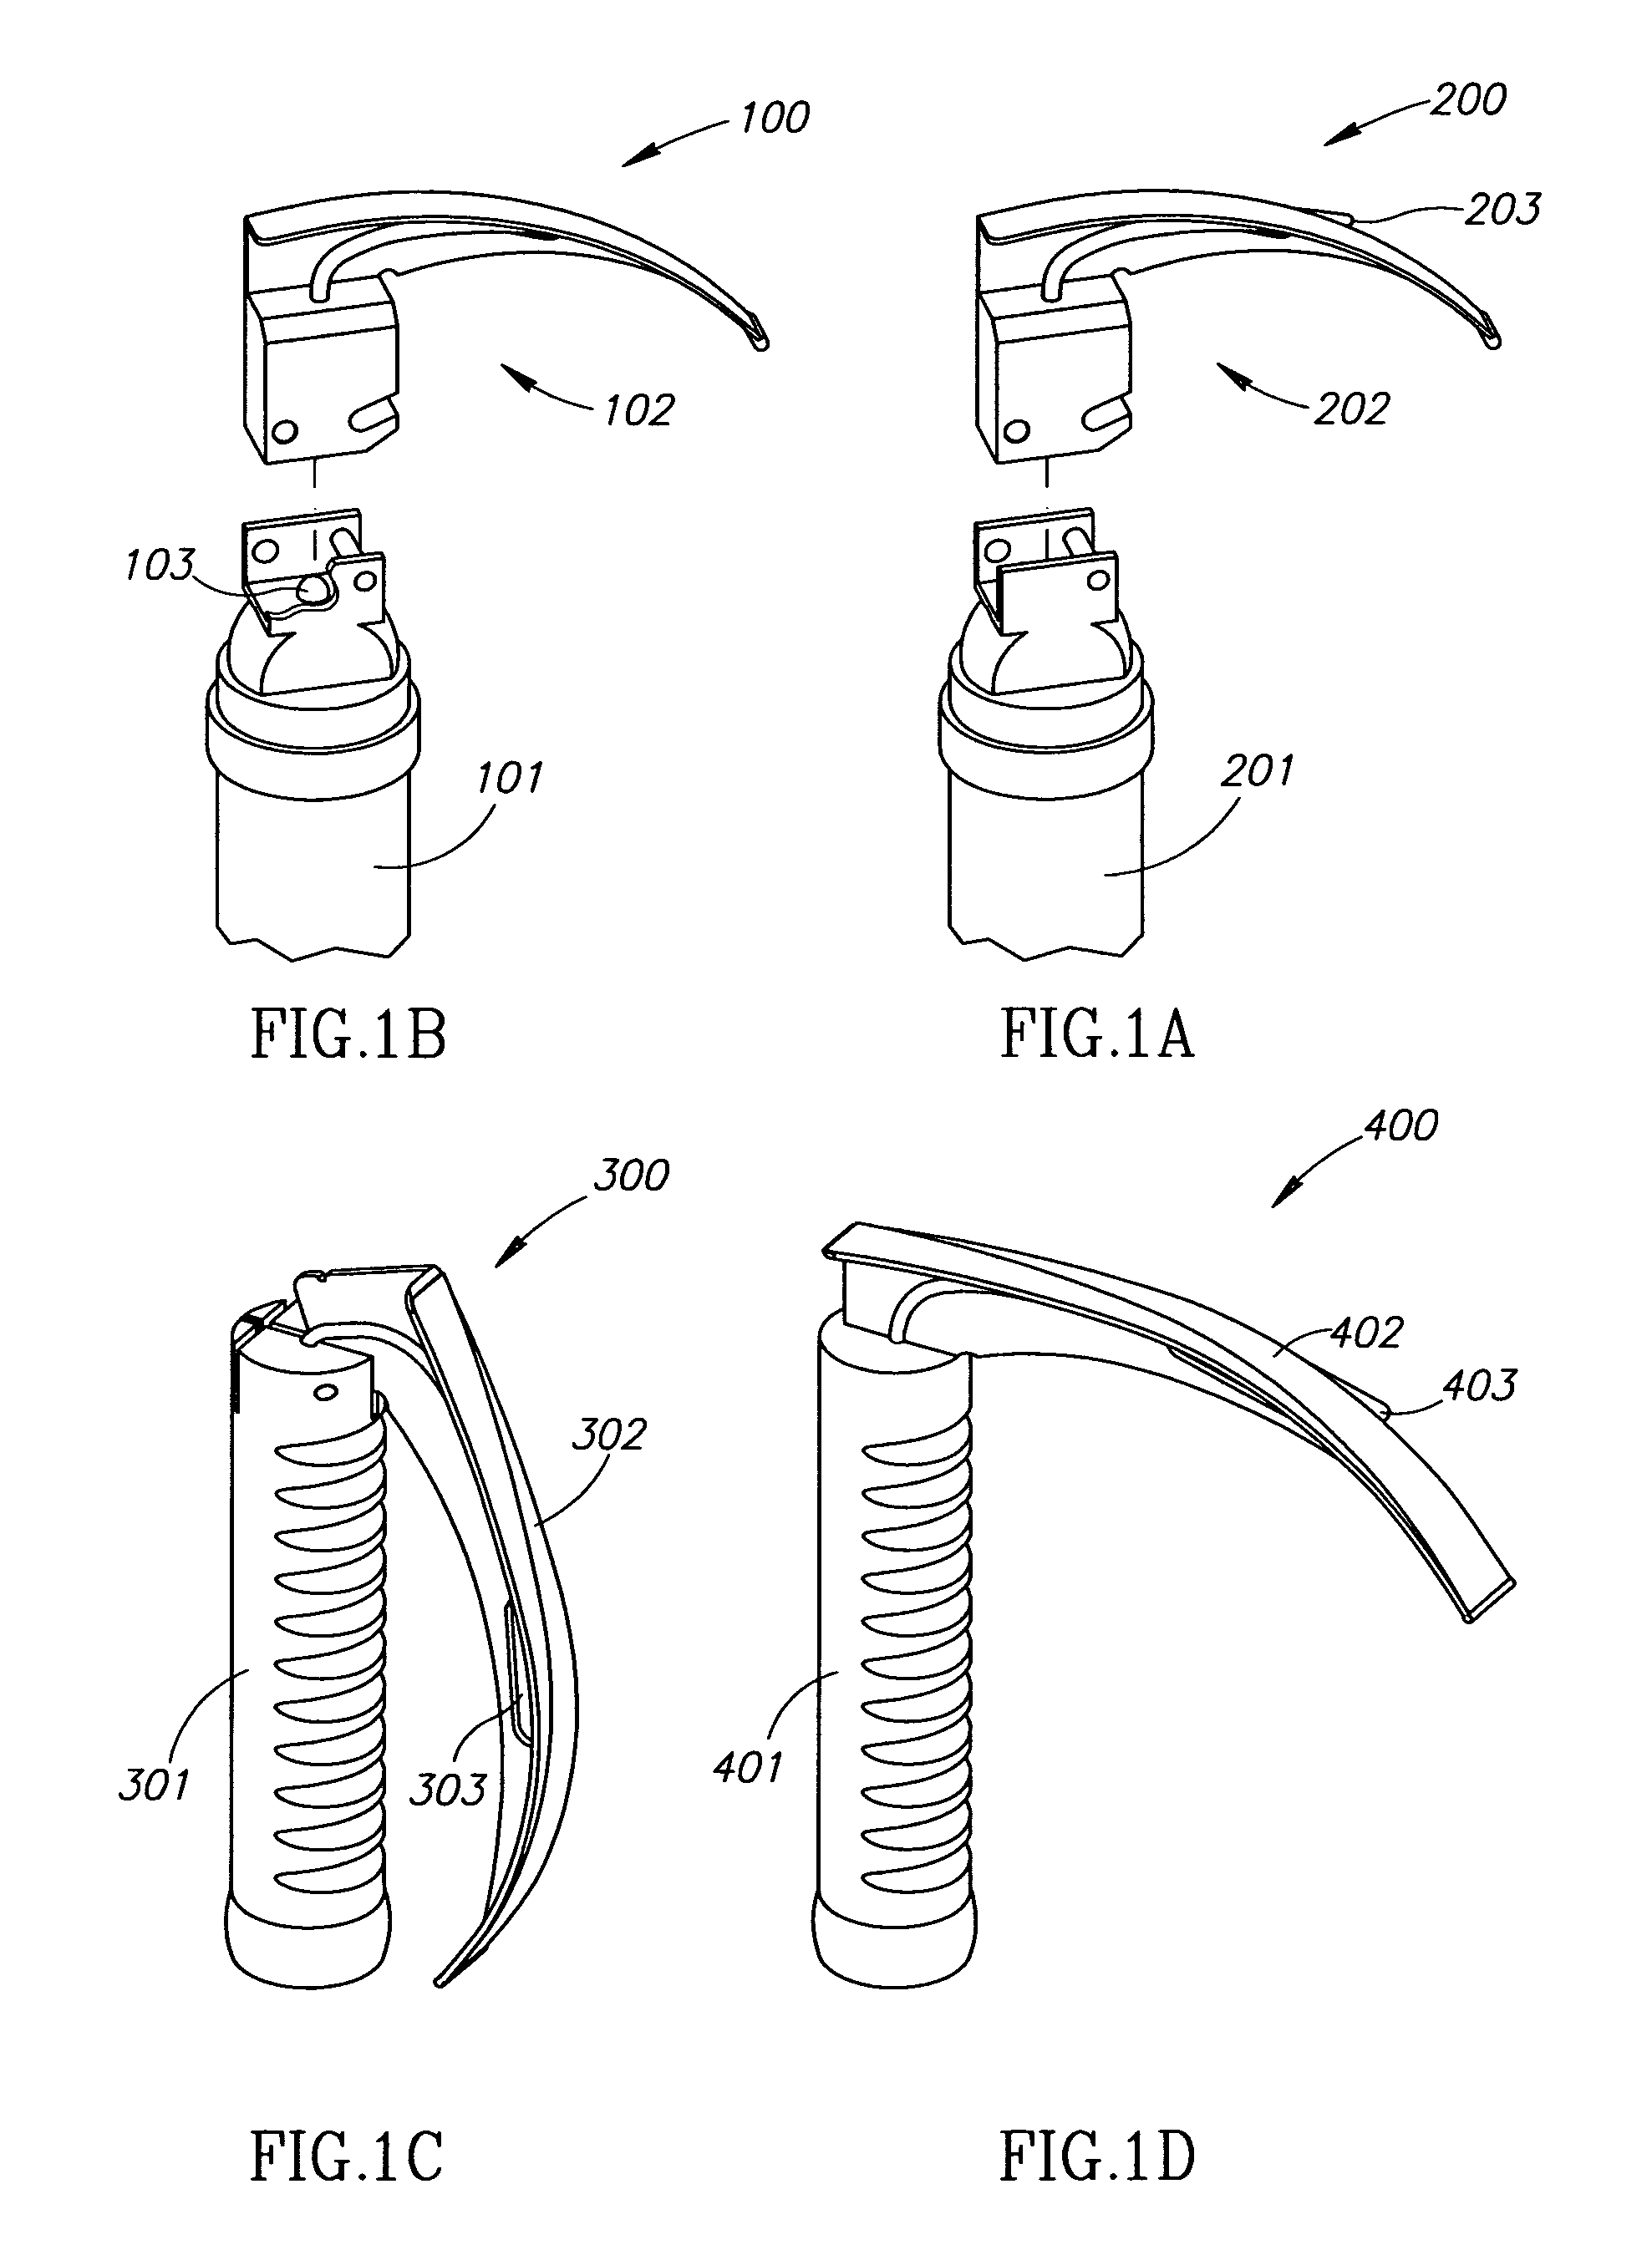 Laryngoscopes and rechargeable illumination units for use therewith